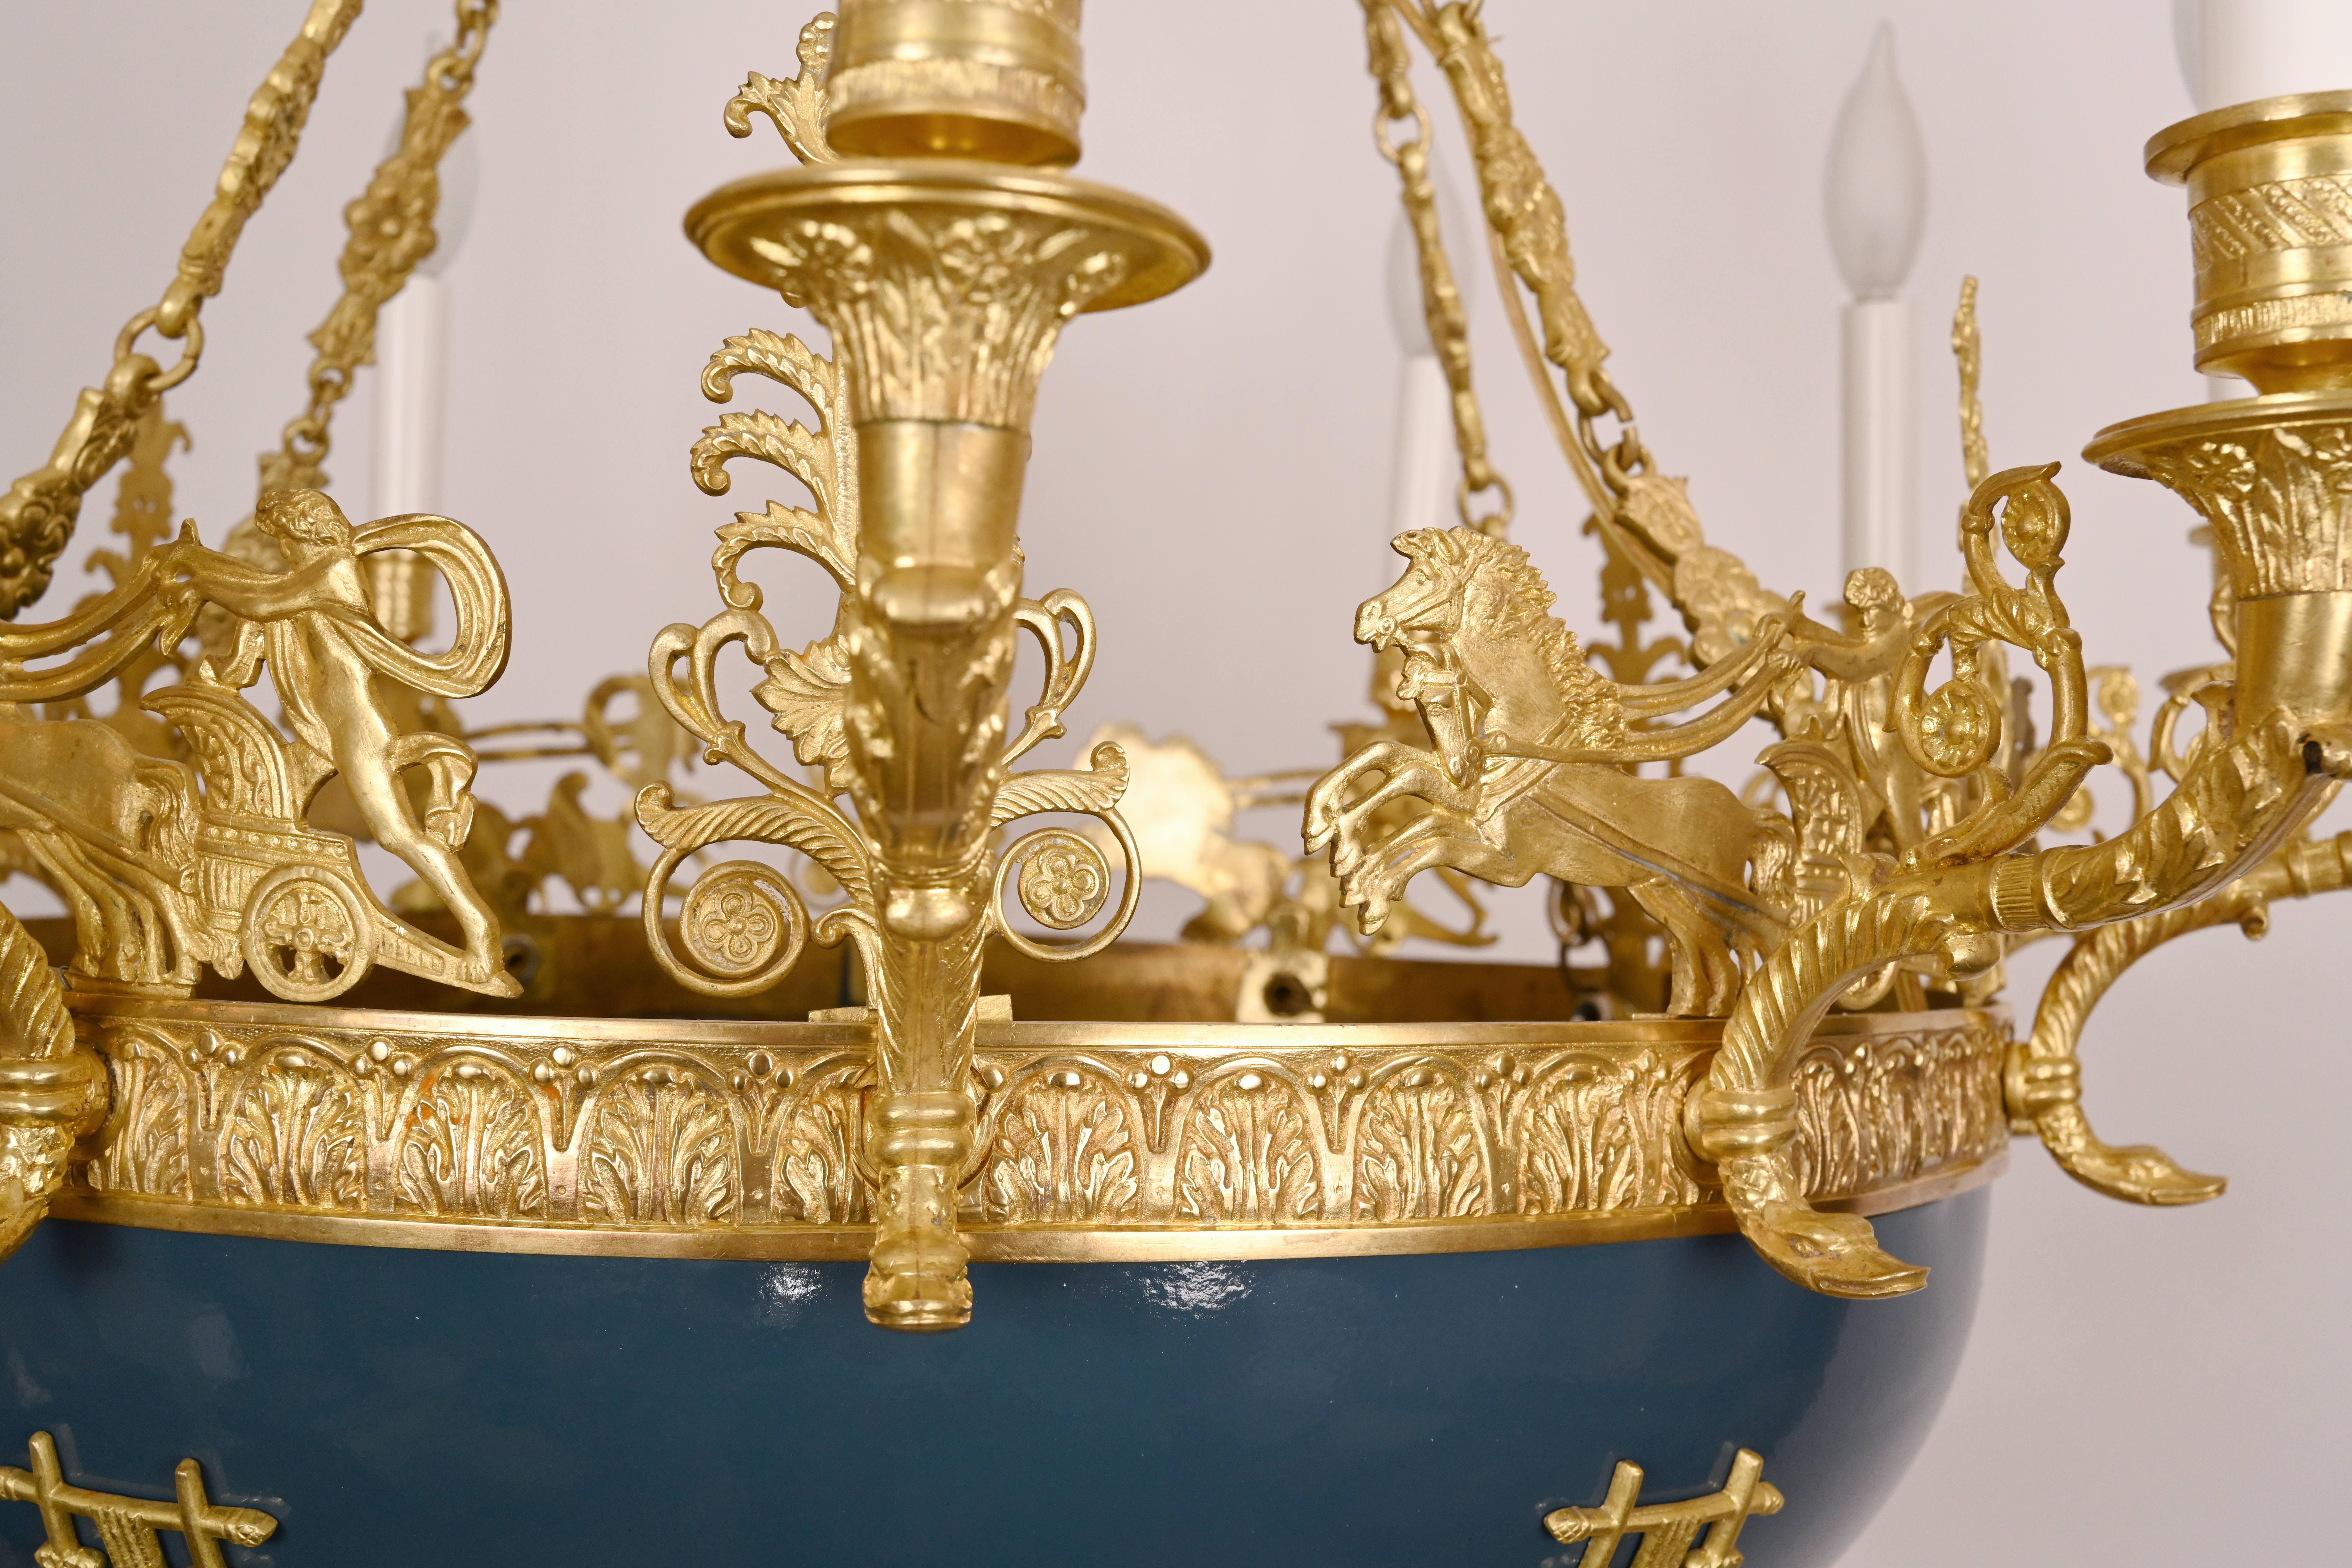 A French Empire style light chandelier with blue painted dish having Empire style cast bronze mounts and detailed cast bronze charioteers, suspended from bronze chain and crown shaped canopy, c. 1880.
 